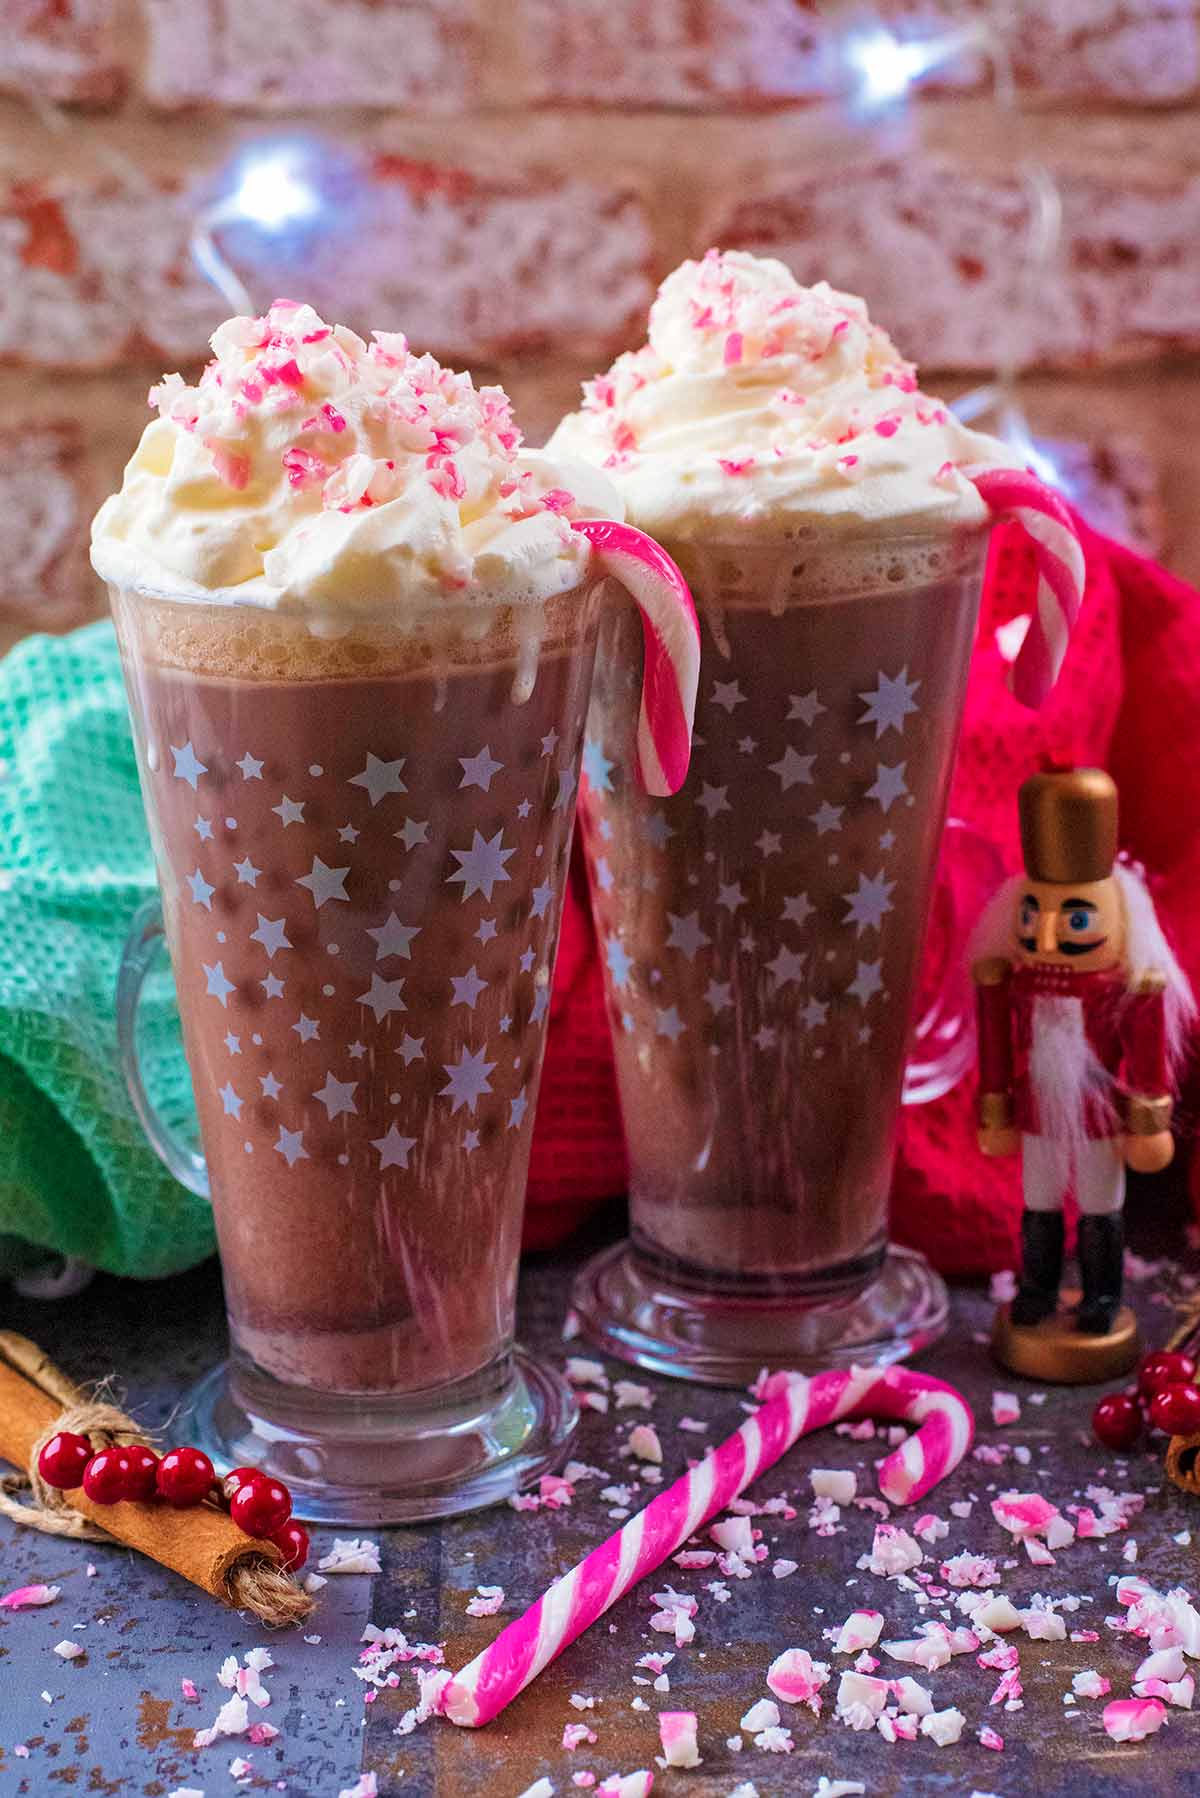 Two glasses of hot chocolate with cream, candy canes and a nutcracker figure.